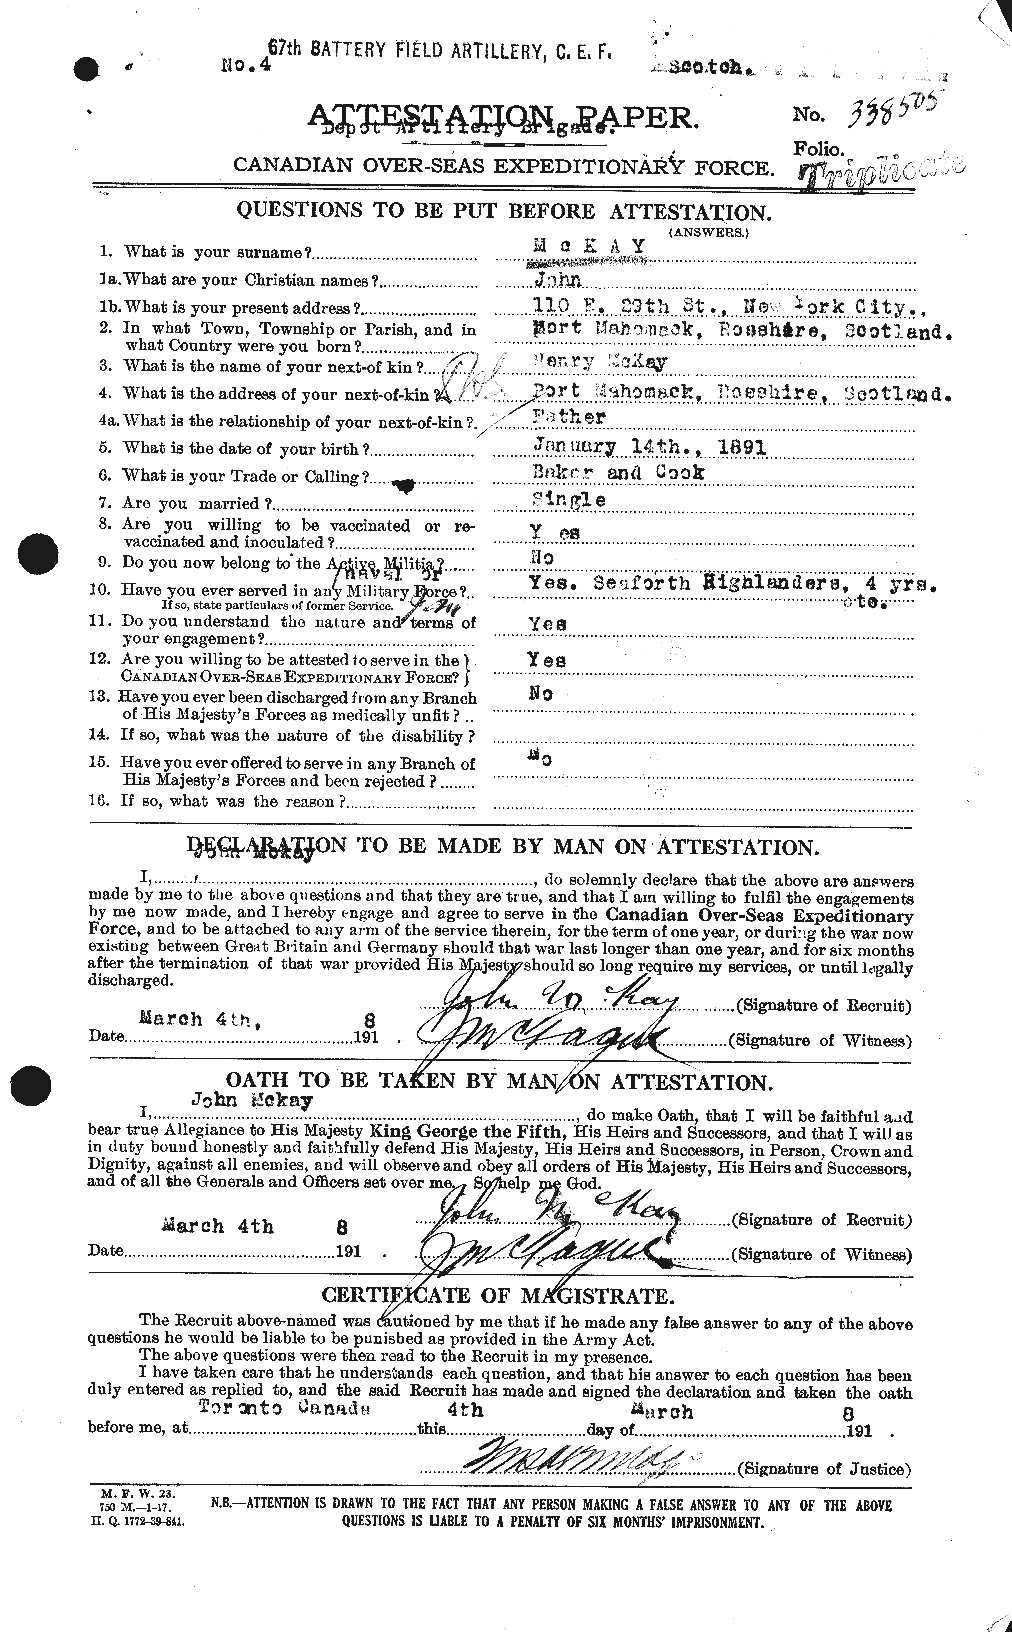 Personnel Records of the First World War - CEF 526975a